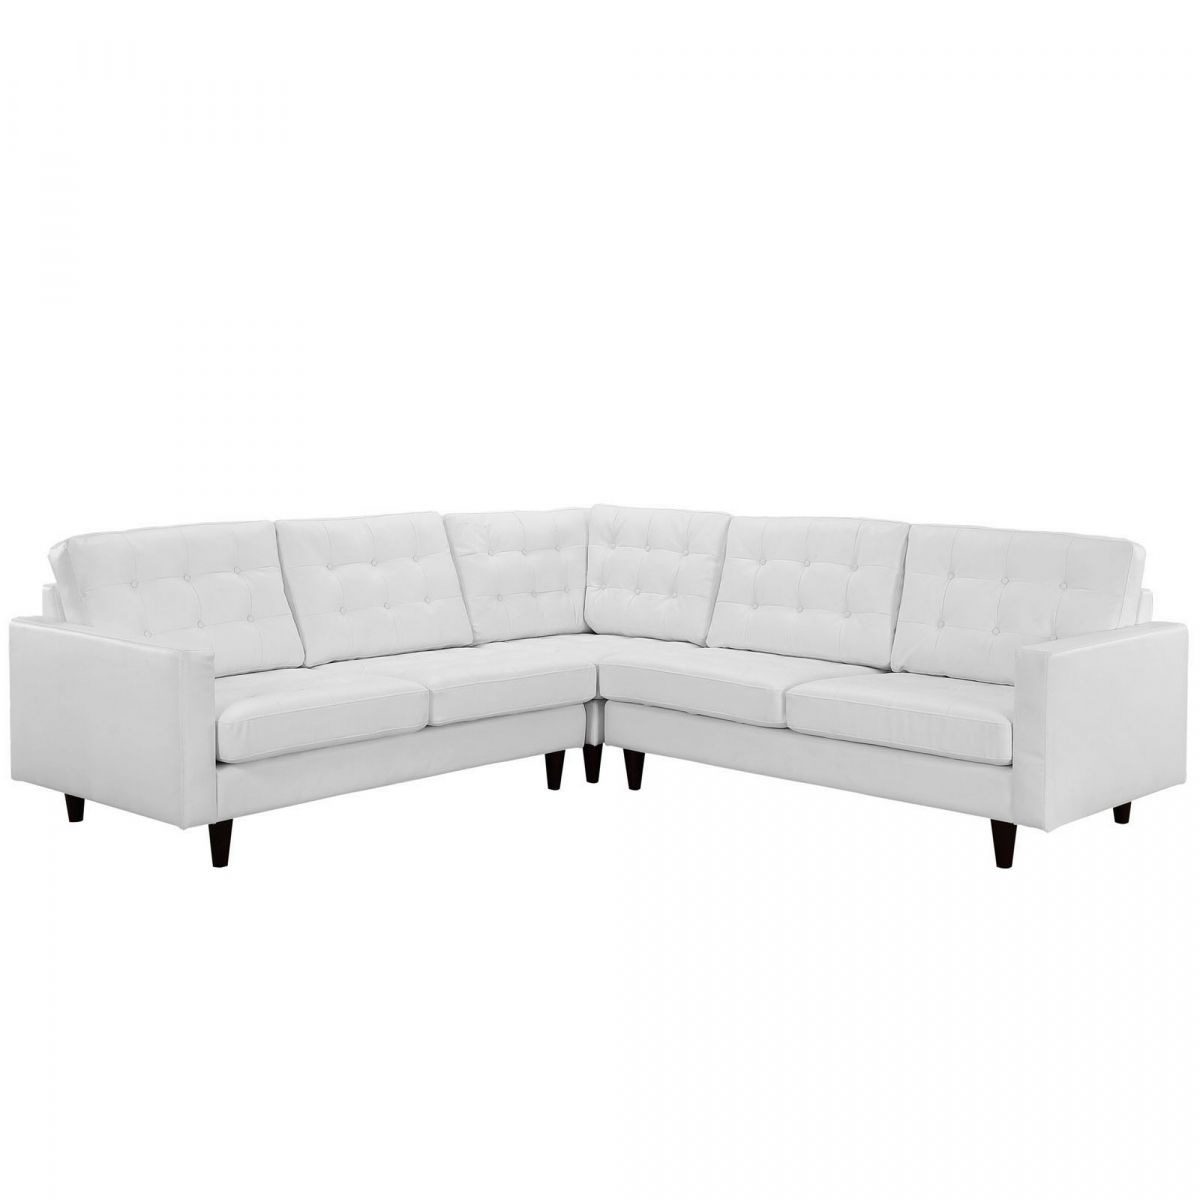 Ellen 3 Piece Leather Sectional Sofa Set – White Pertaining To 3pc Bonded Leather Upholstered Wooden Sectional Sofas Brown (Photo 12 of 15)